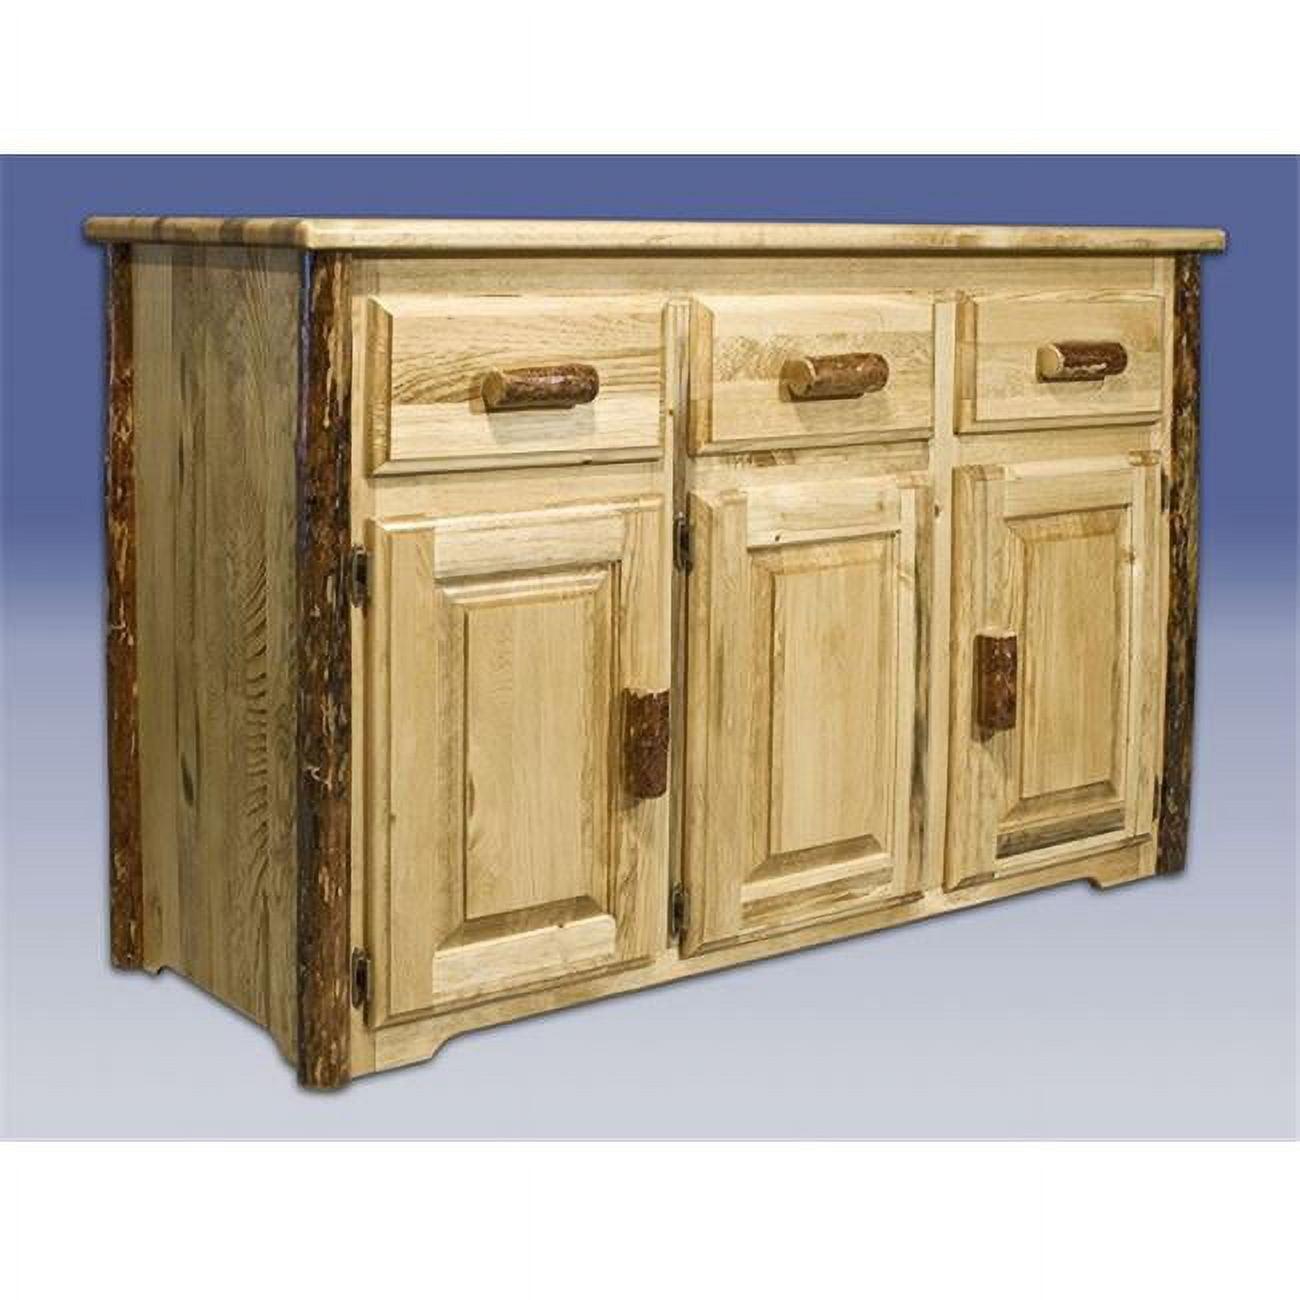 Rustic Grand Lodge Solid Pine Sideboard with Contrasting Accents